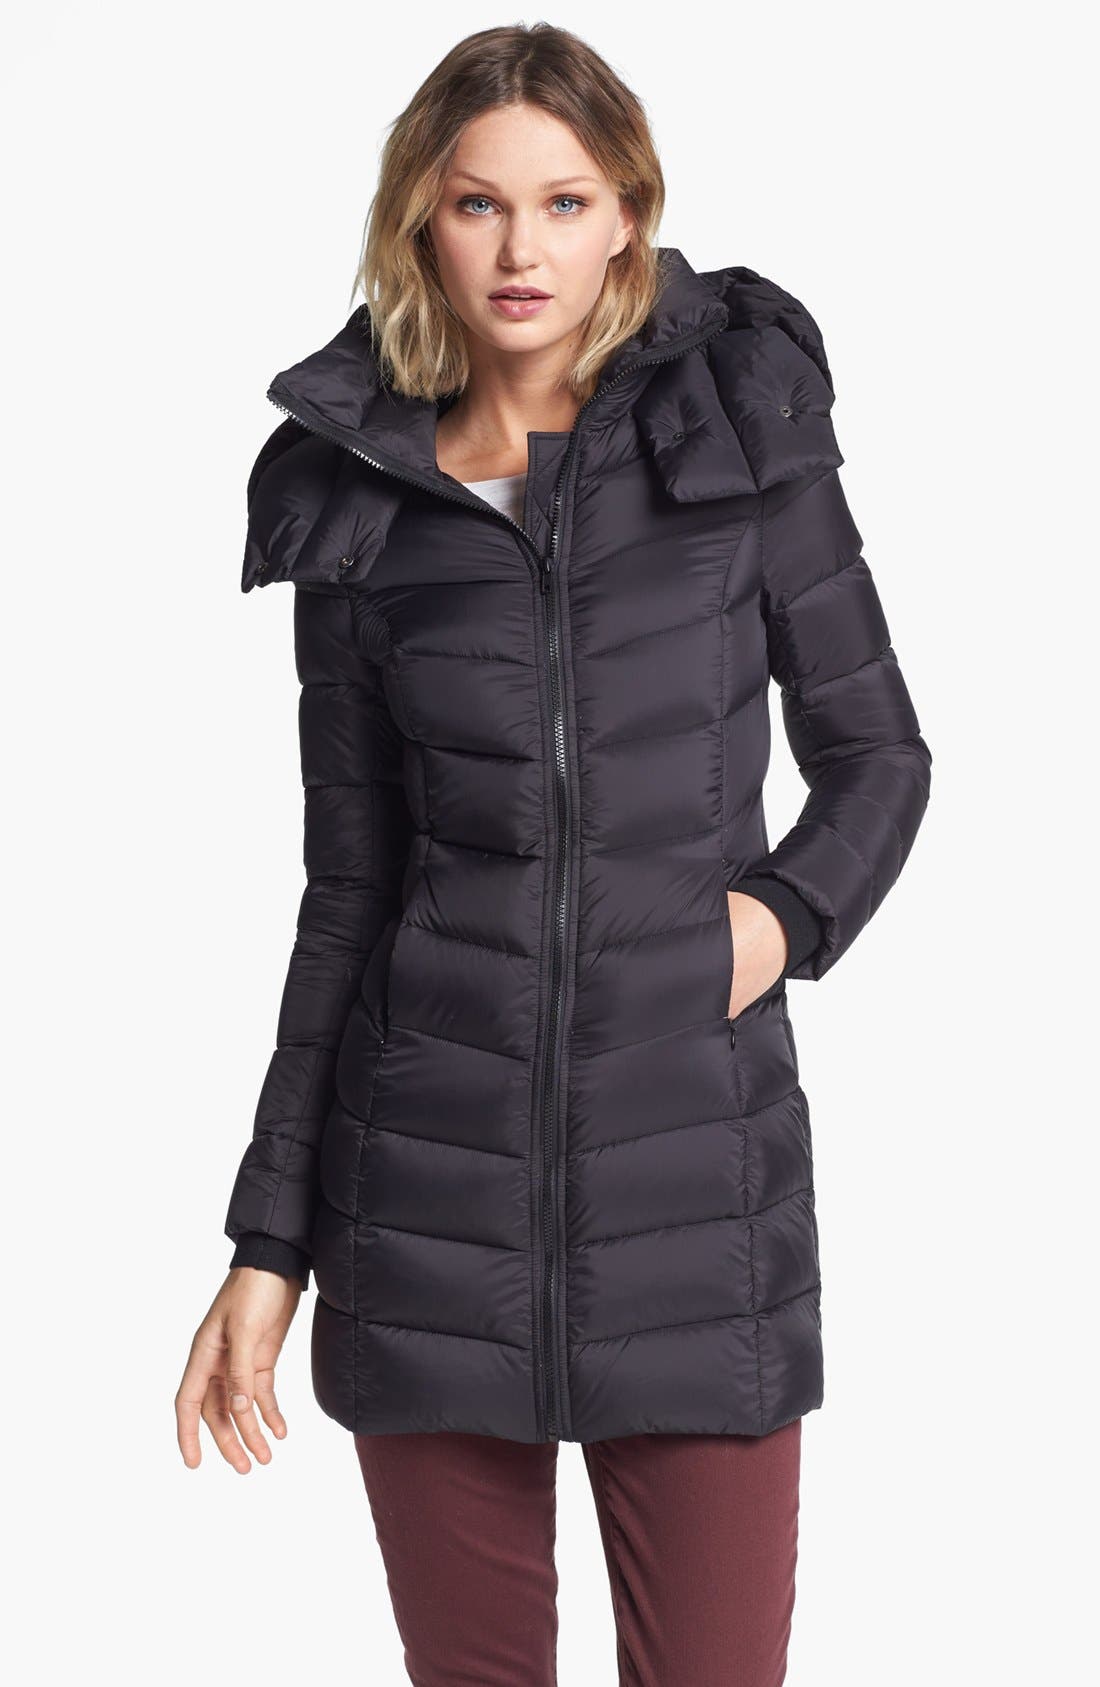 soia & kyo hooded down puffer jacket